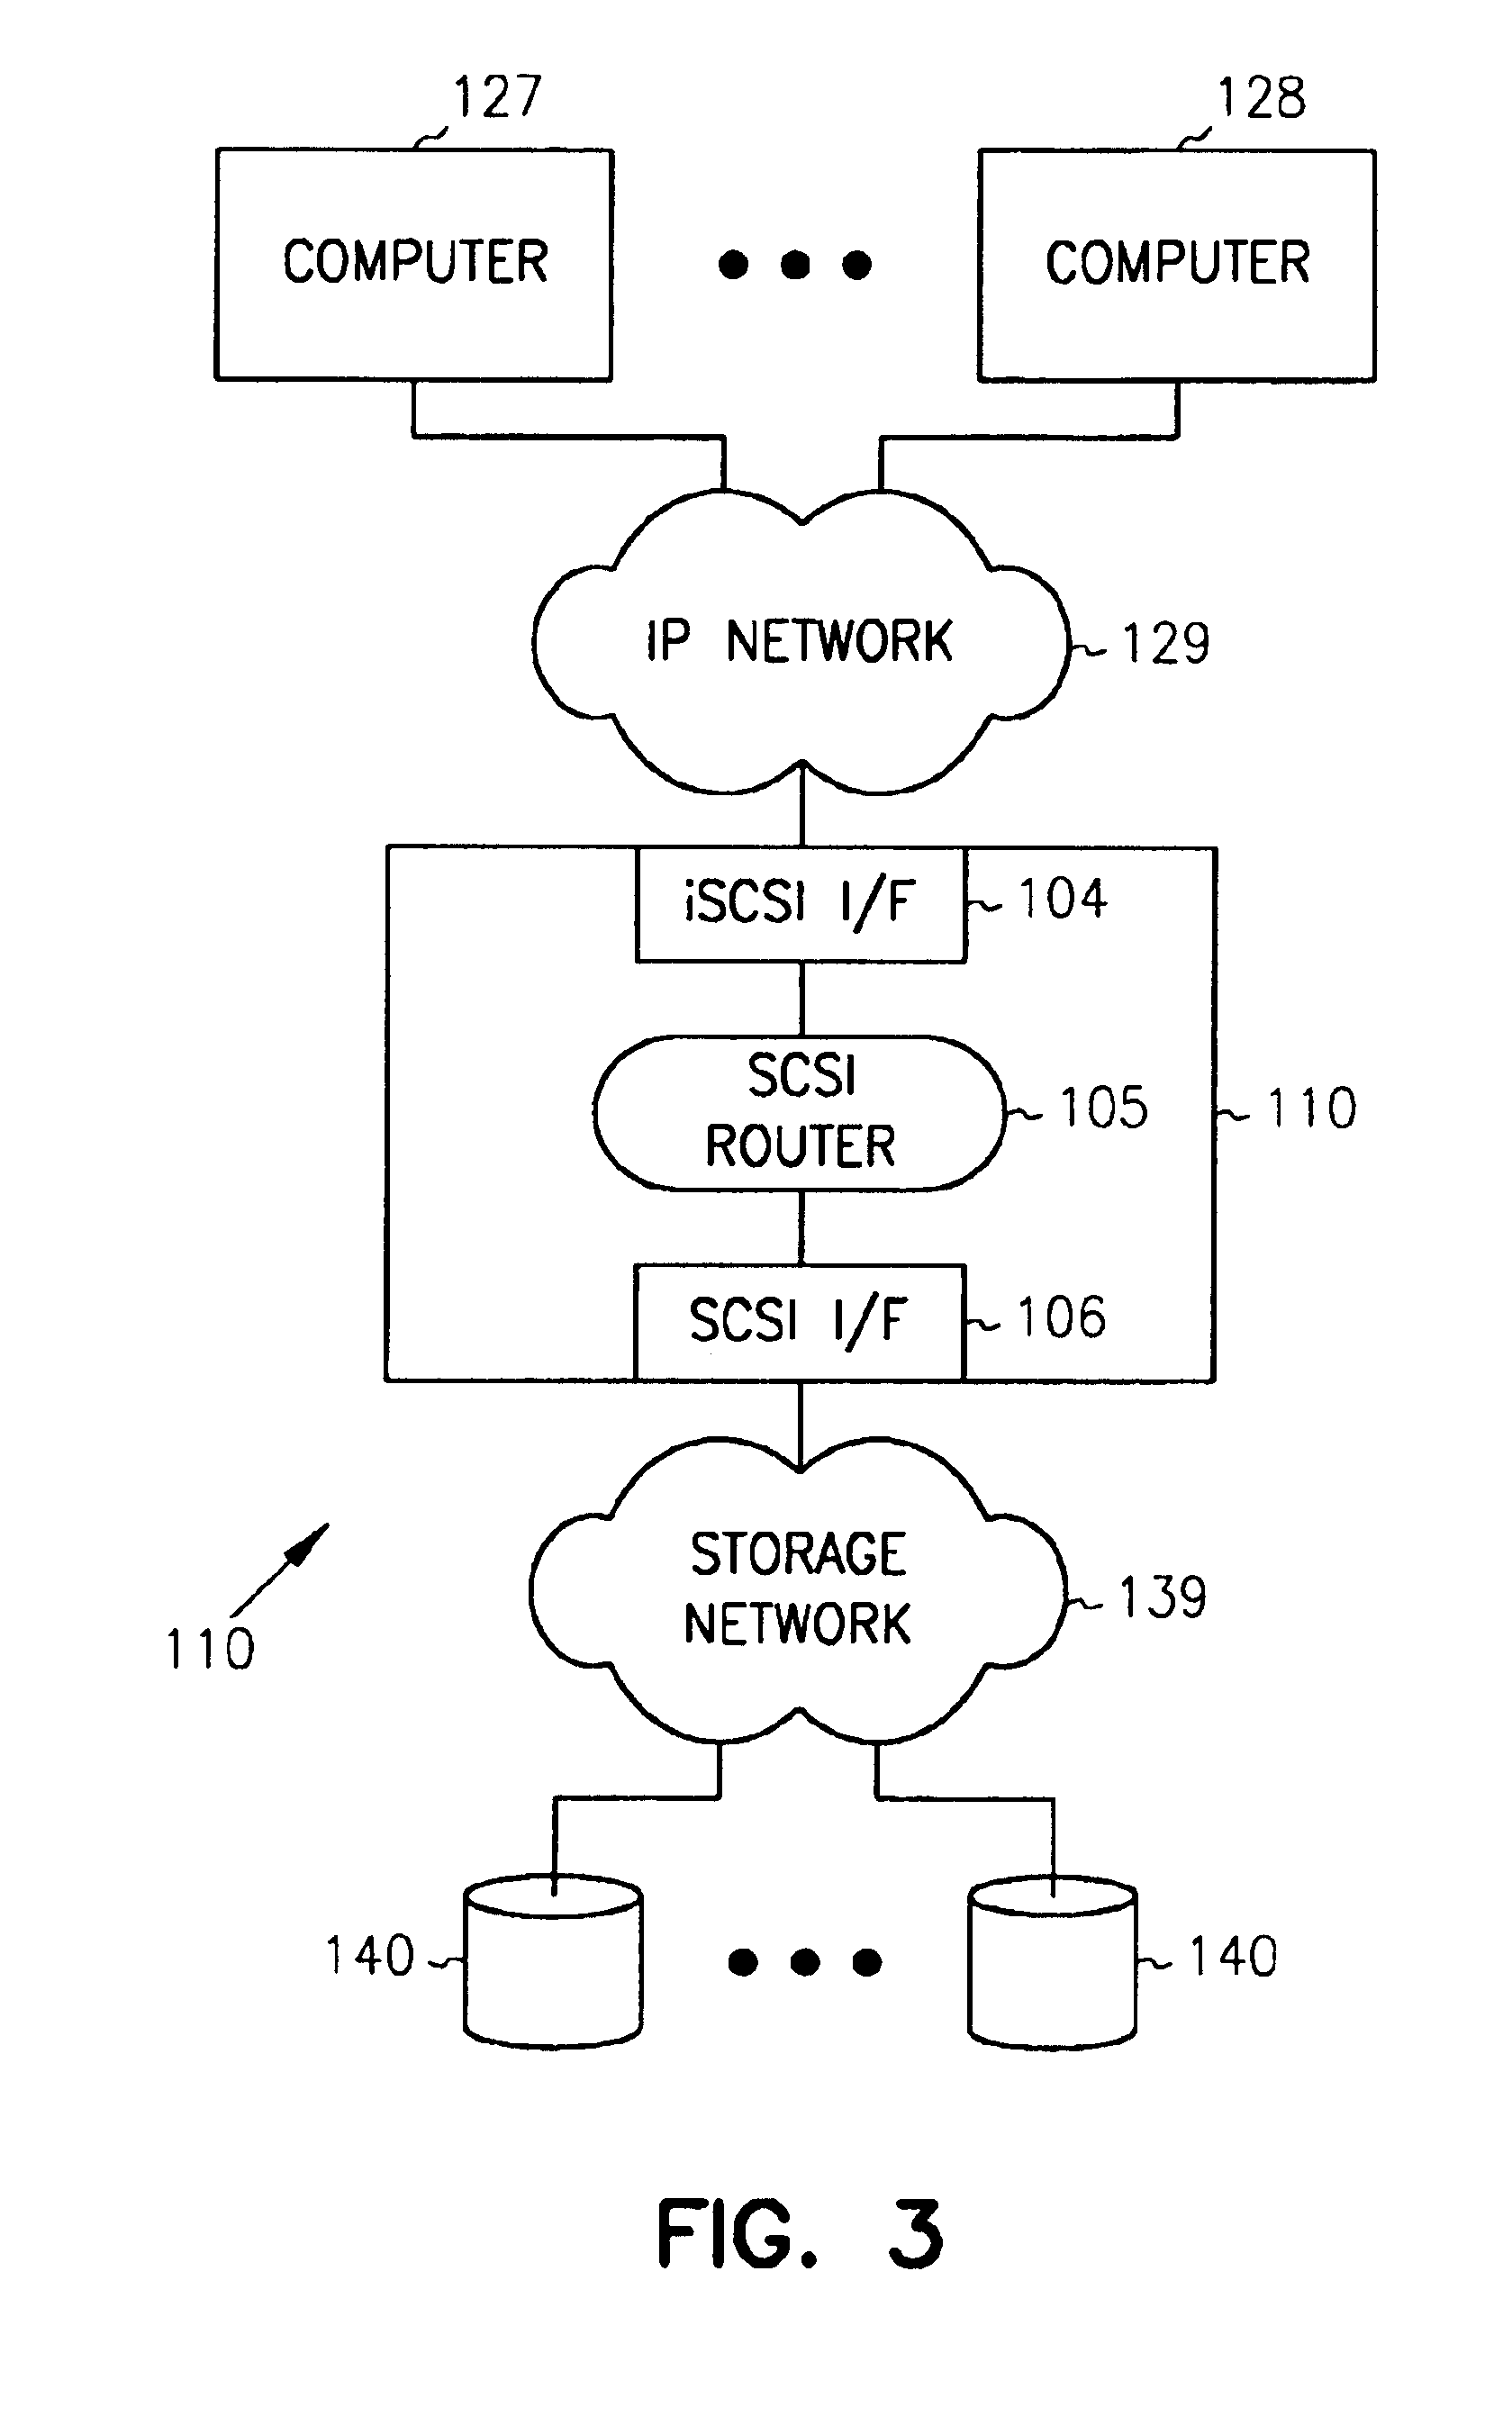 Method and apparatus for accessing remote storage using SCSI and an IP network